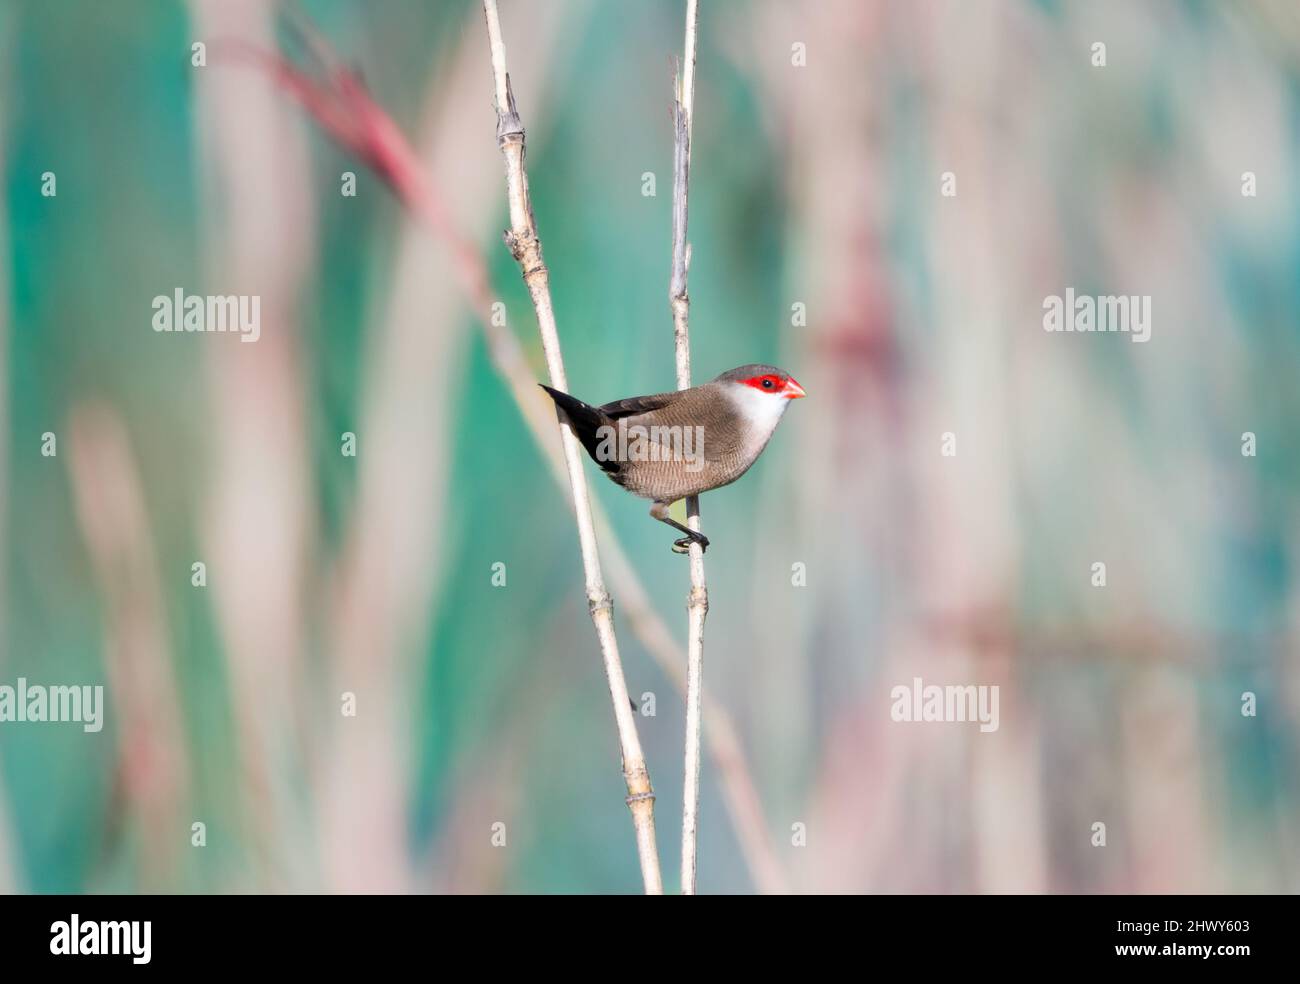 Common Waxbill bird, Estrilda astrild, perched in the tall reeds in a meadow in Trinidad, West Indies. Stock Photo